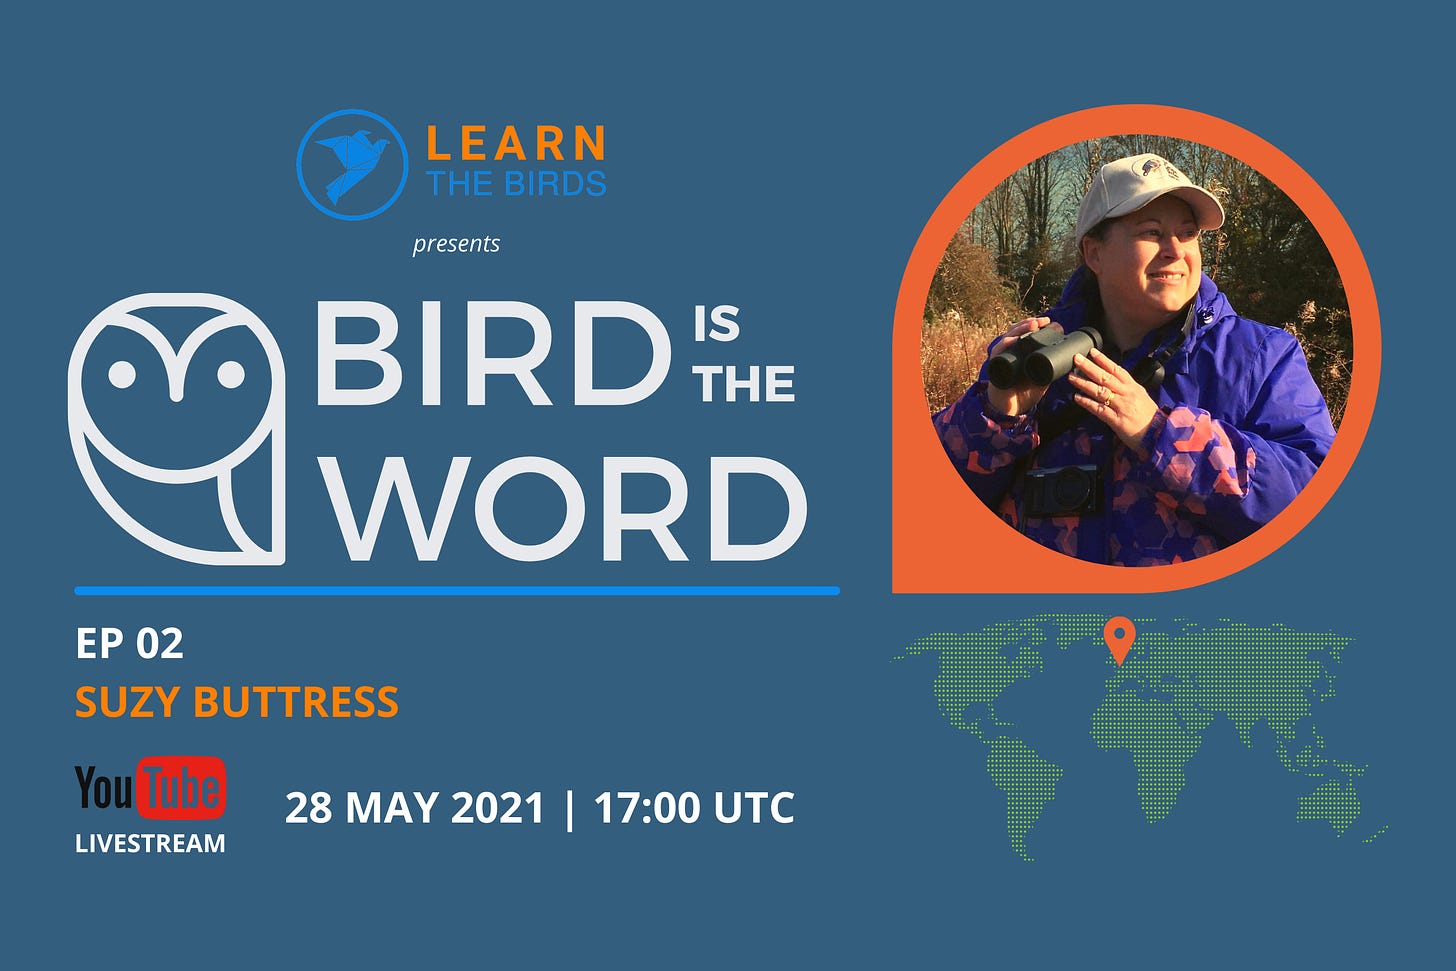 Promocard for Bird is the Word, showing a photo of Suzy and the following text: Learn the Birds presents Bird is the Word, Ep 02 Suzy Buttress 28 May 2021 | 17:00 UTC. YouTube Livestream logo. Card has blue background with a green map of the world in the lower right corner